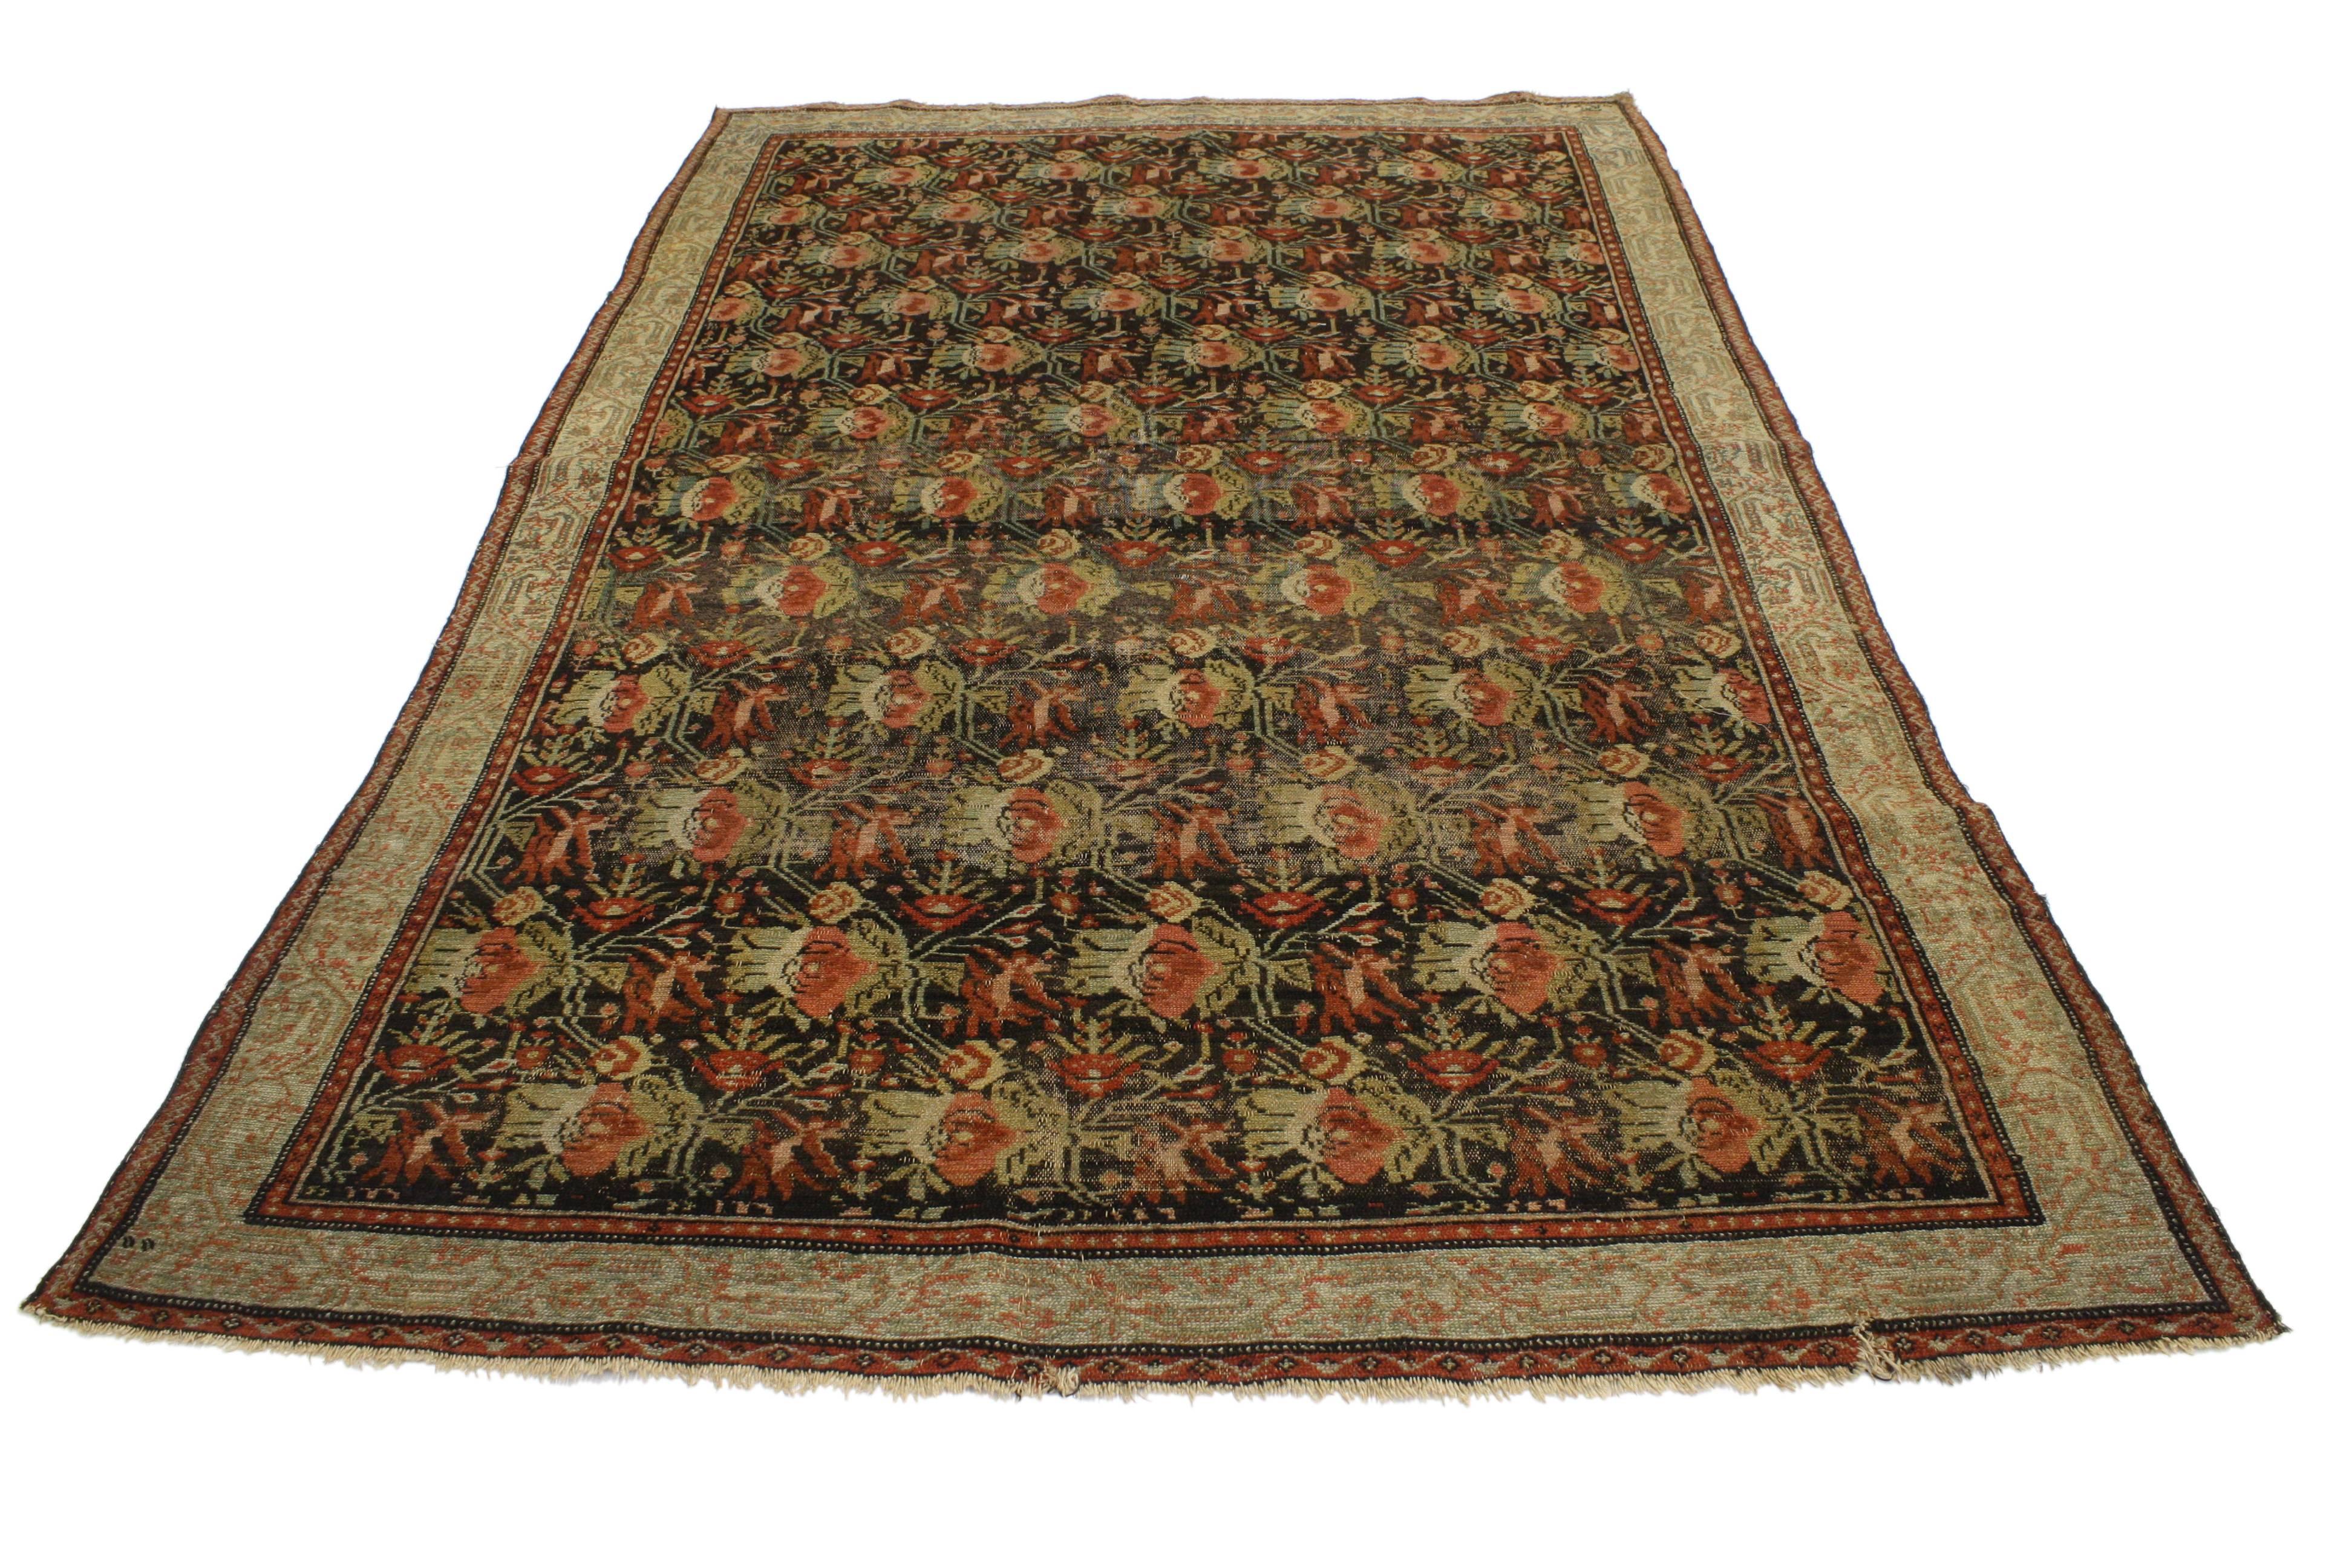 Vintage Persian Senneh Rug with American Colonial Style In Good Condition For Sale In Dallas, TX